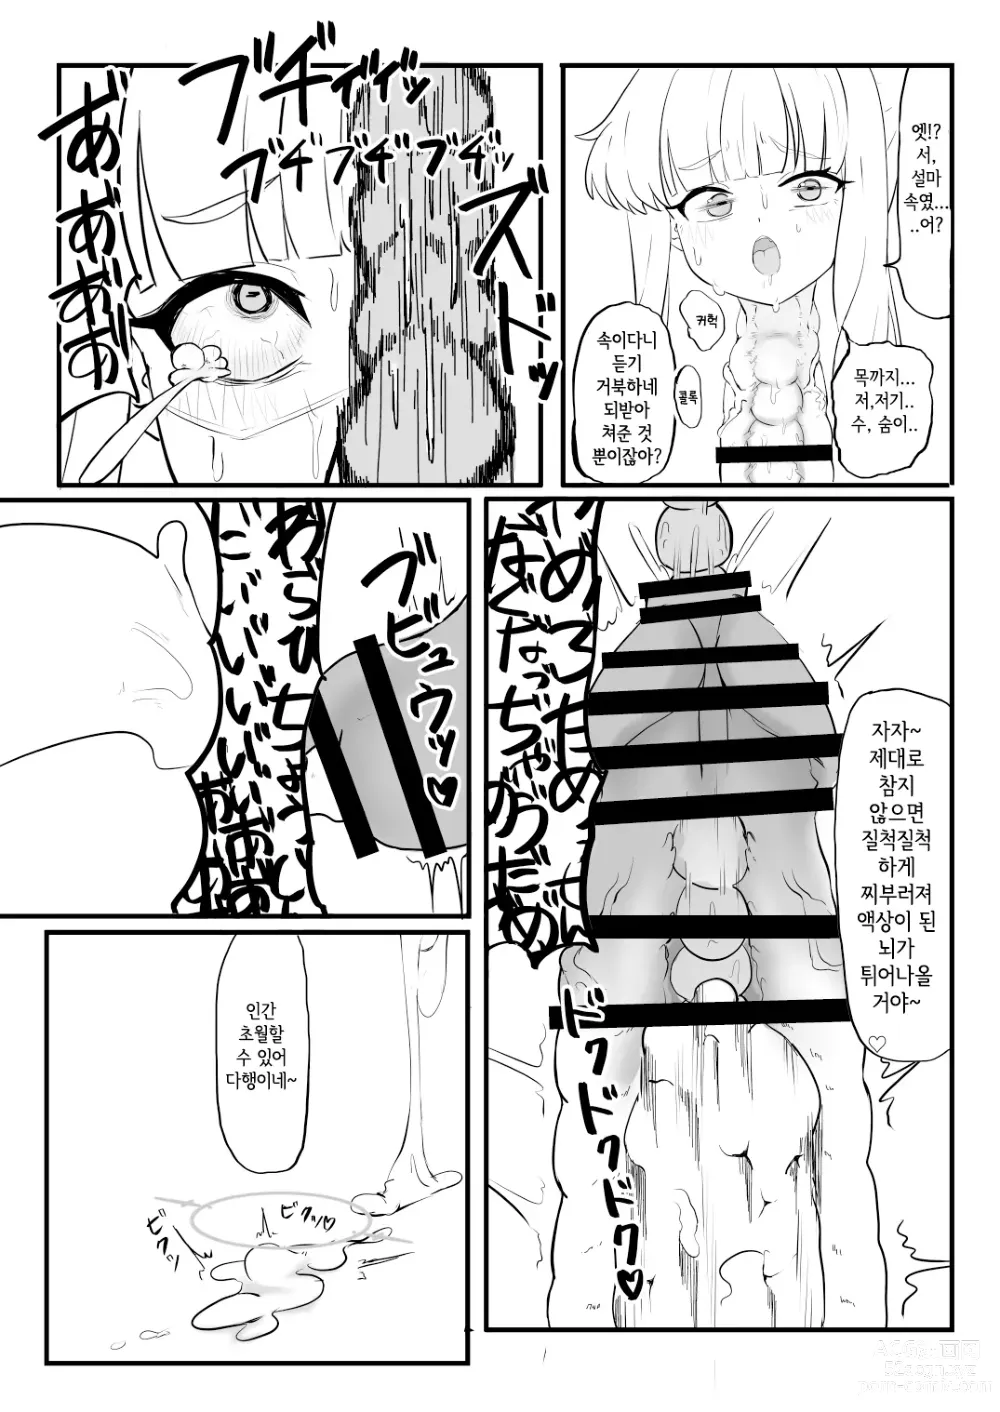 Page 30 of doujinshi Dick Neck Mix! Vol. 2 블루아카 좆목 합동지